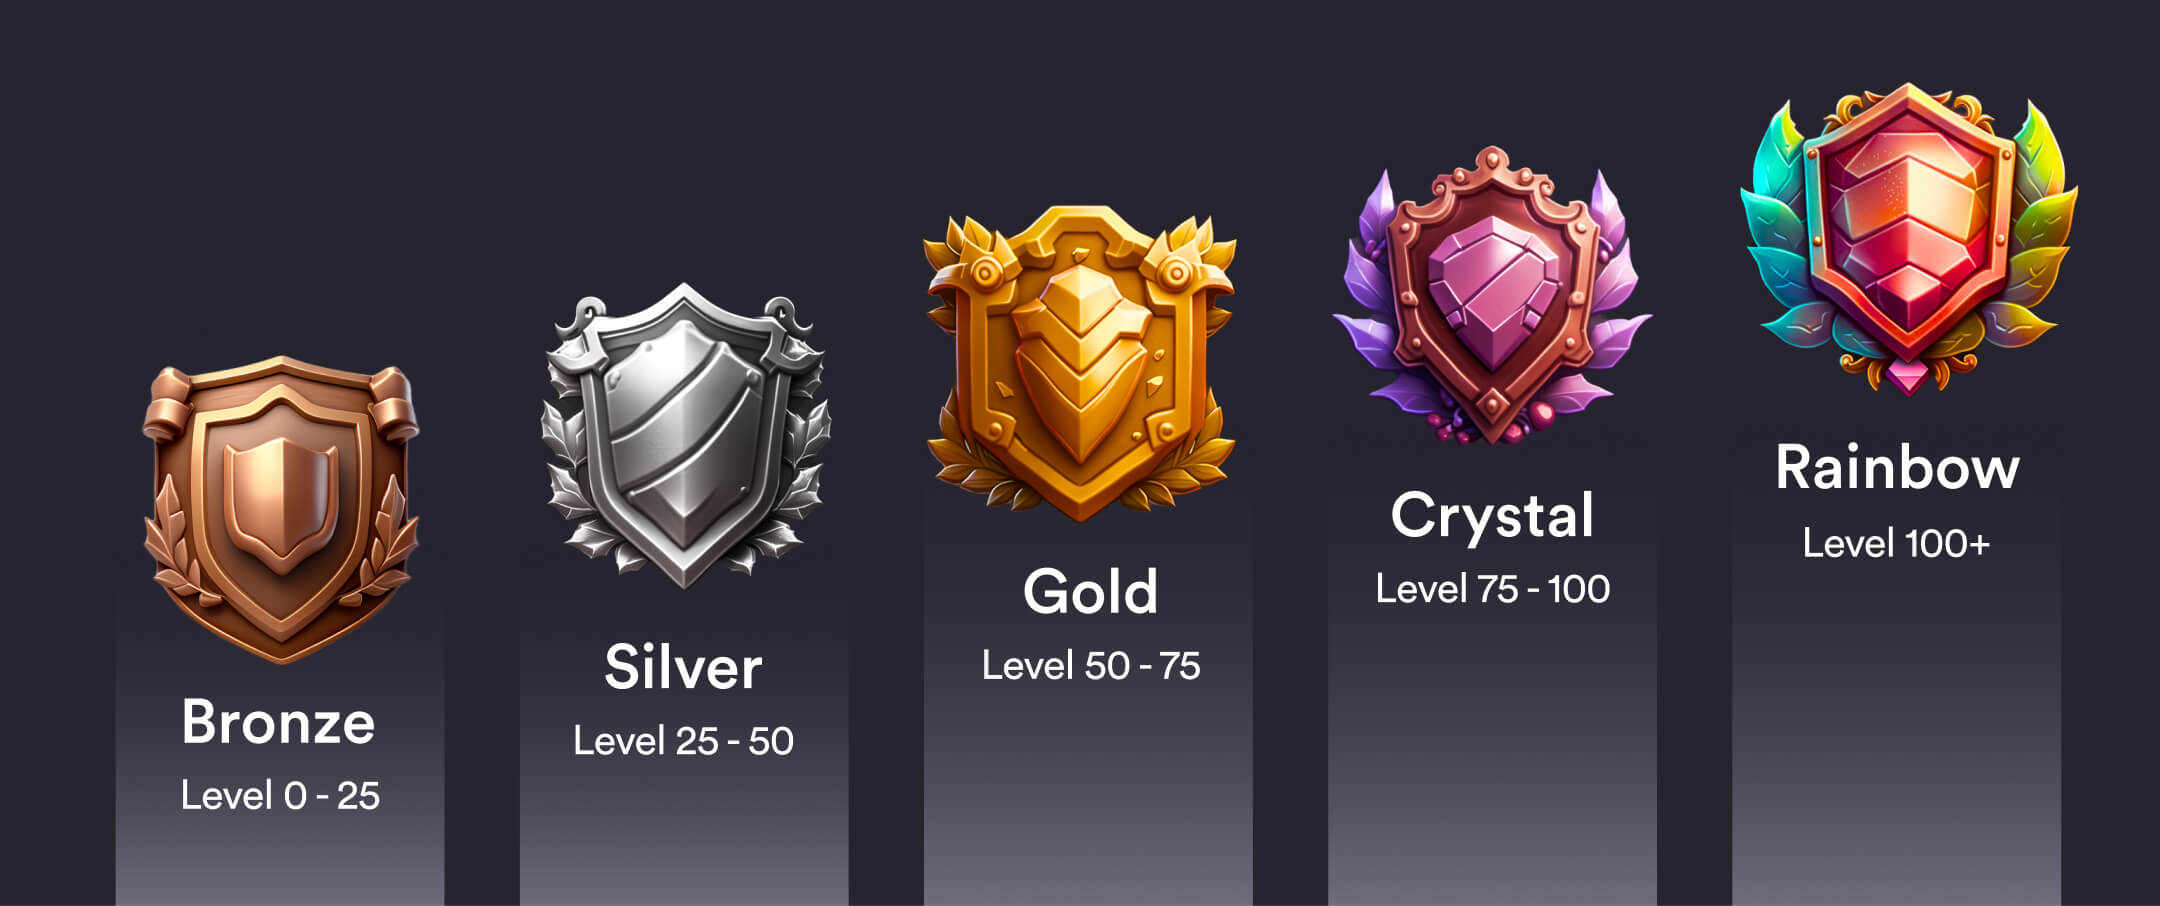 Rank of the five different creator levels which are bronze, silver, gold, crystal, and rainbow